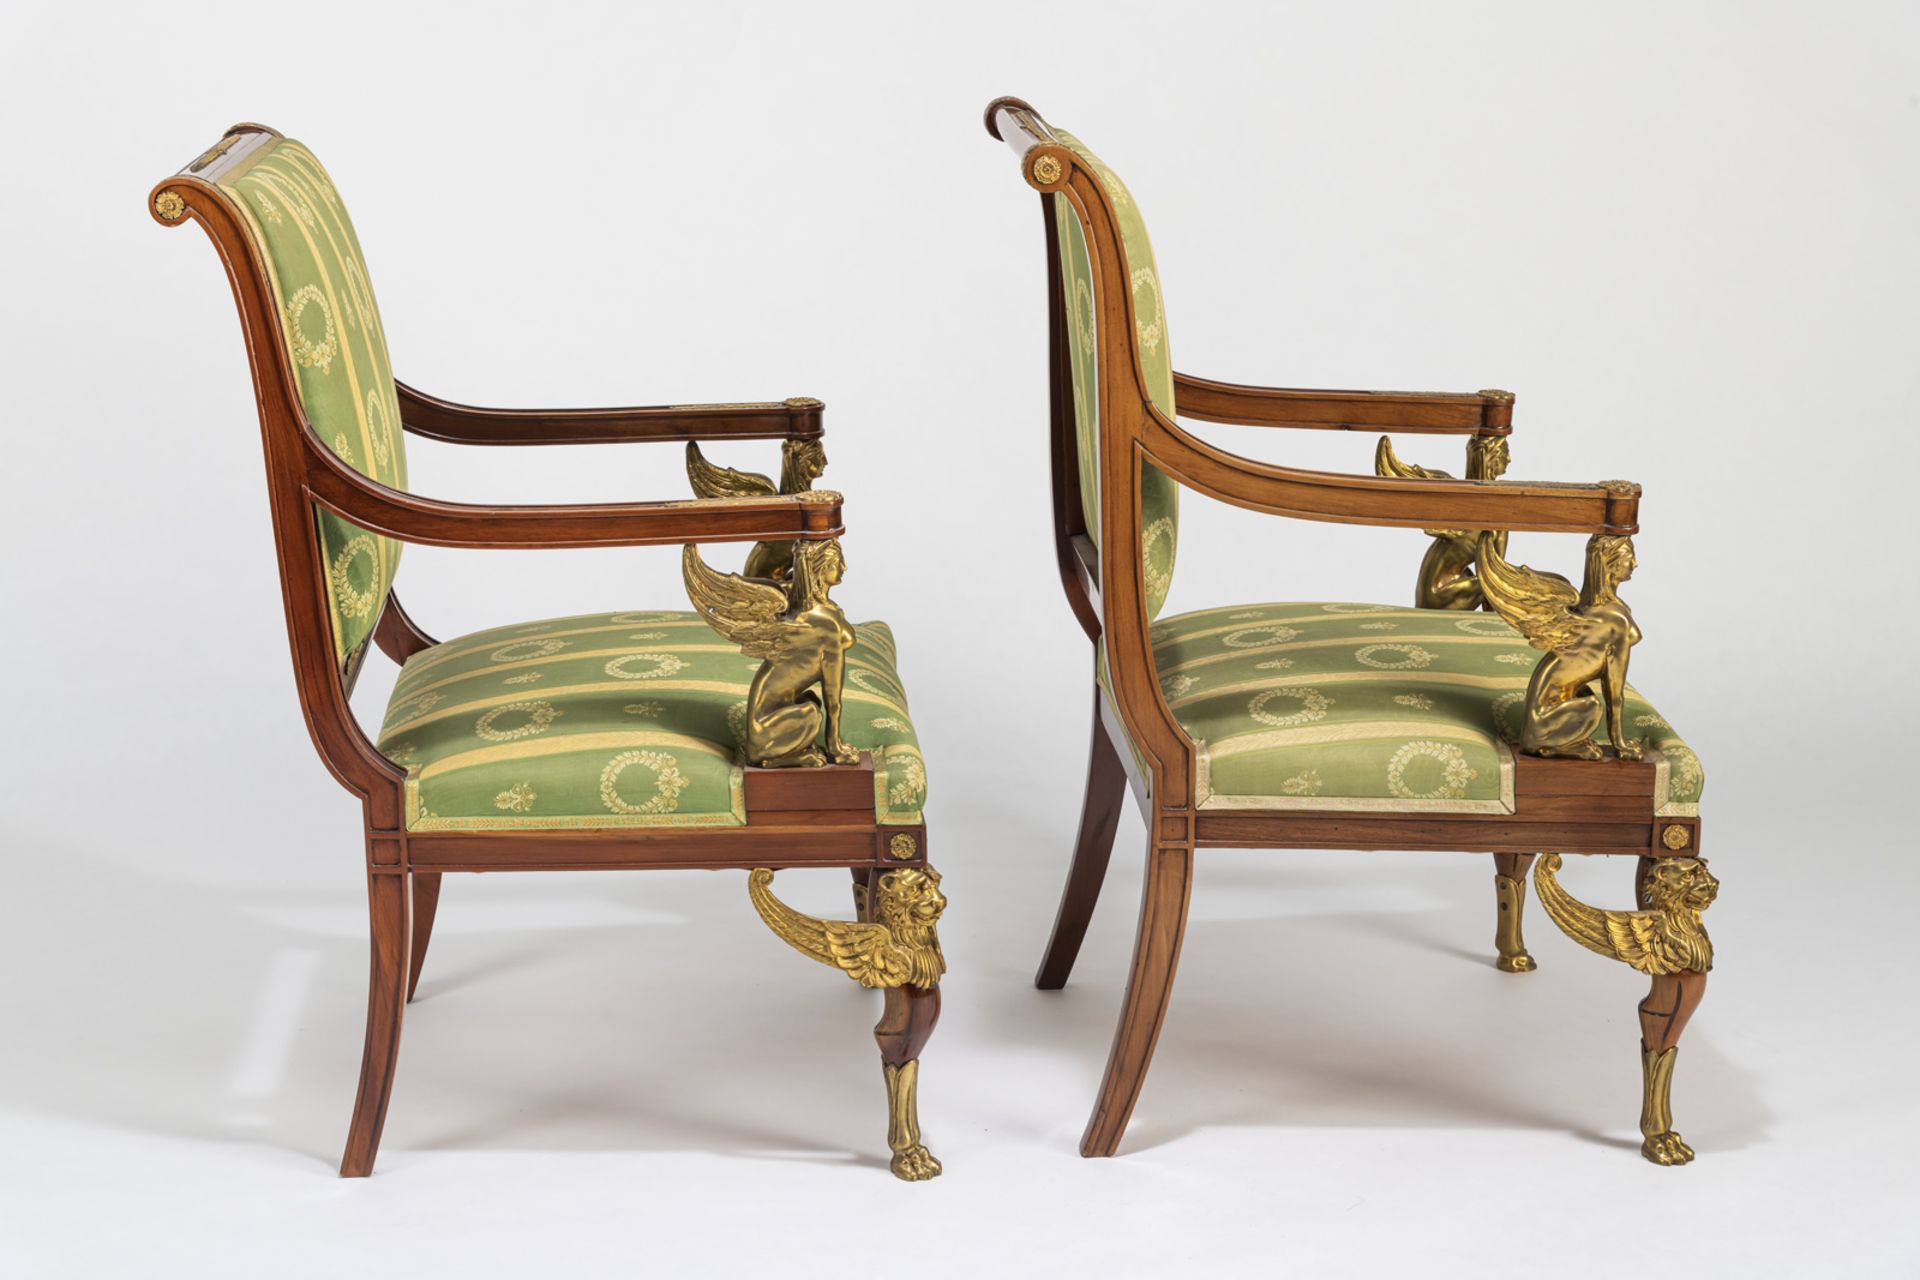 A PAIR OF NEOCLASSICAL ORMOLU MOUNTED MAHOGANY FAUTEUILS WITH SPHINX - Image 12 of 12